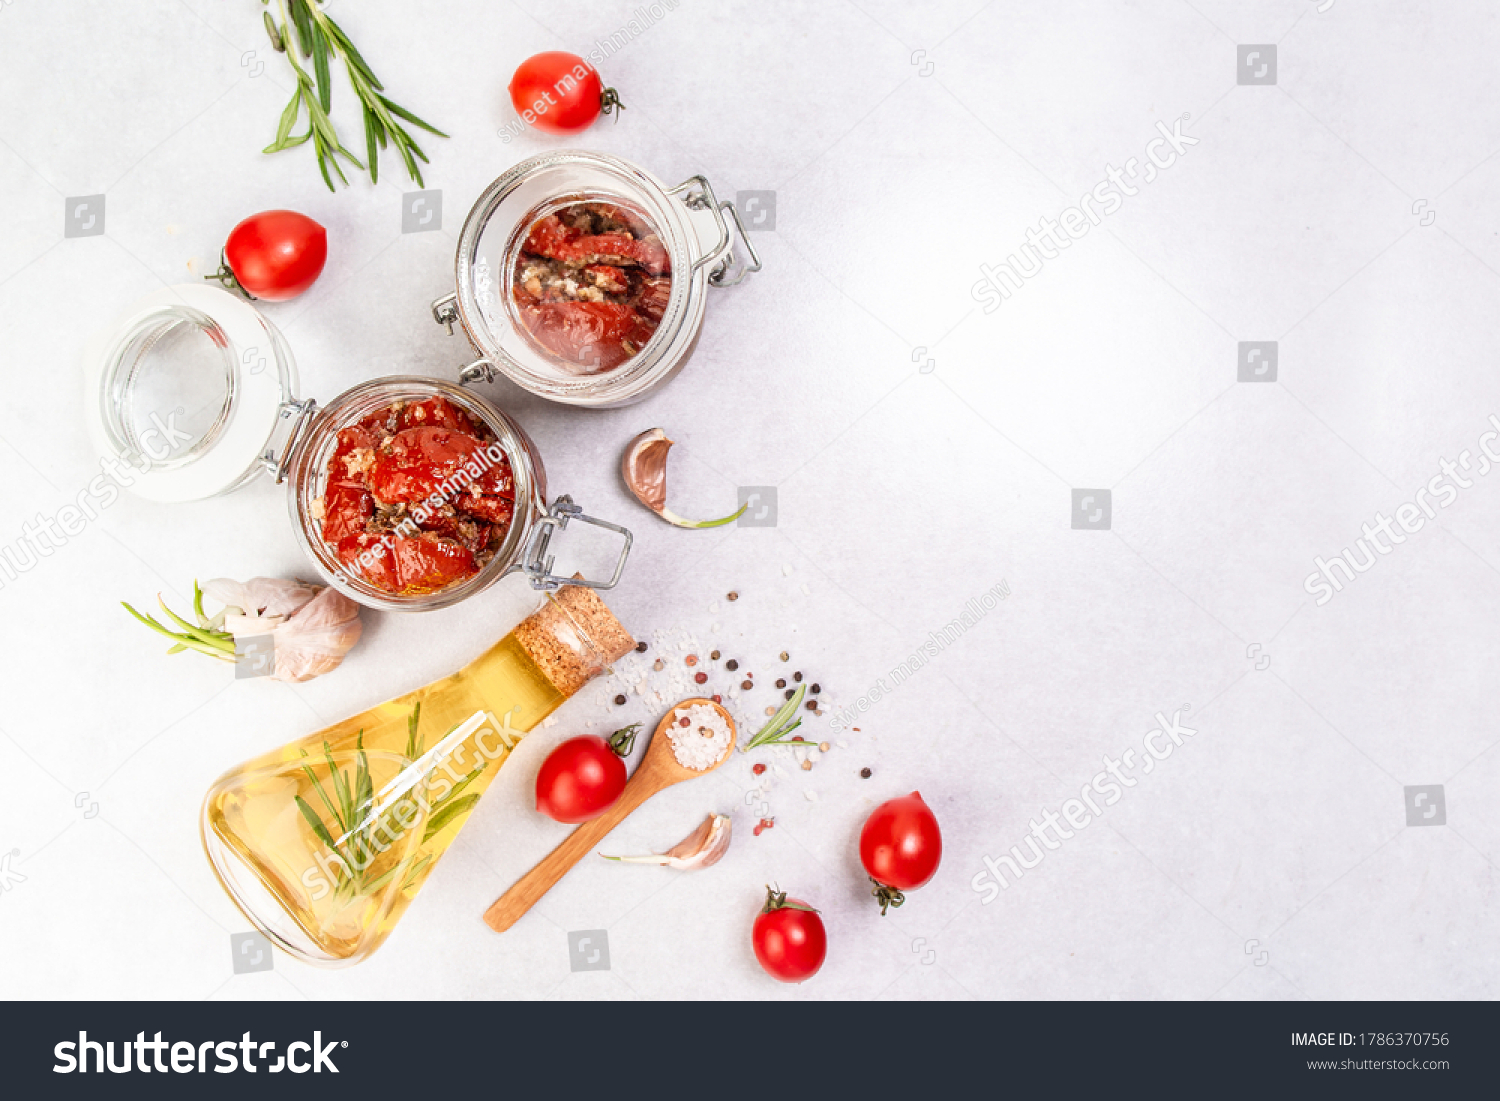 Sun dried tomatoes with garlic, oregano, olive oil in a jar on a light table, banner, menu recipe place for text, top view. #1786370756